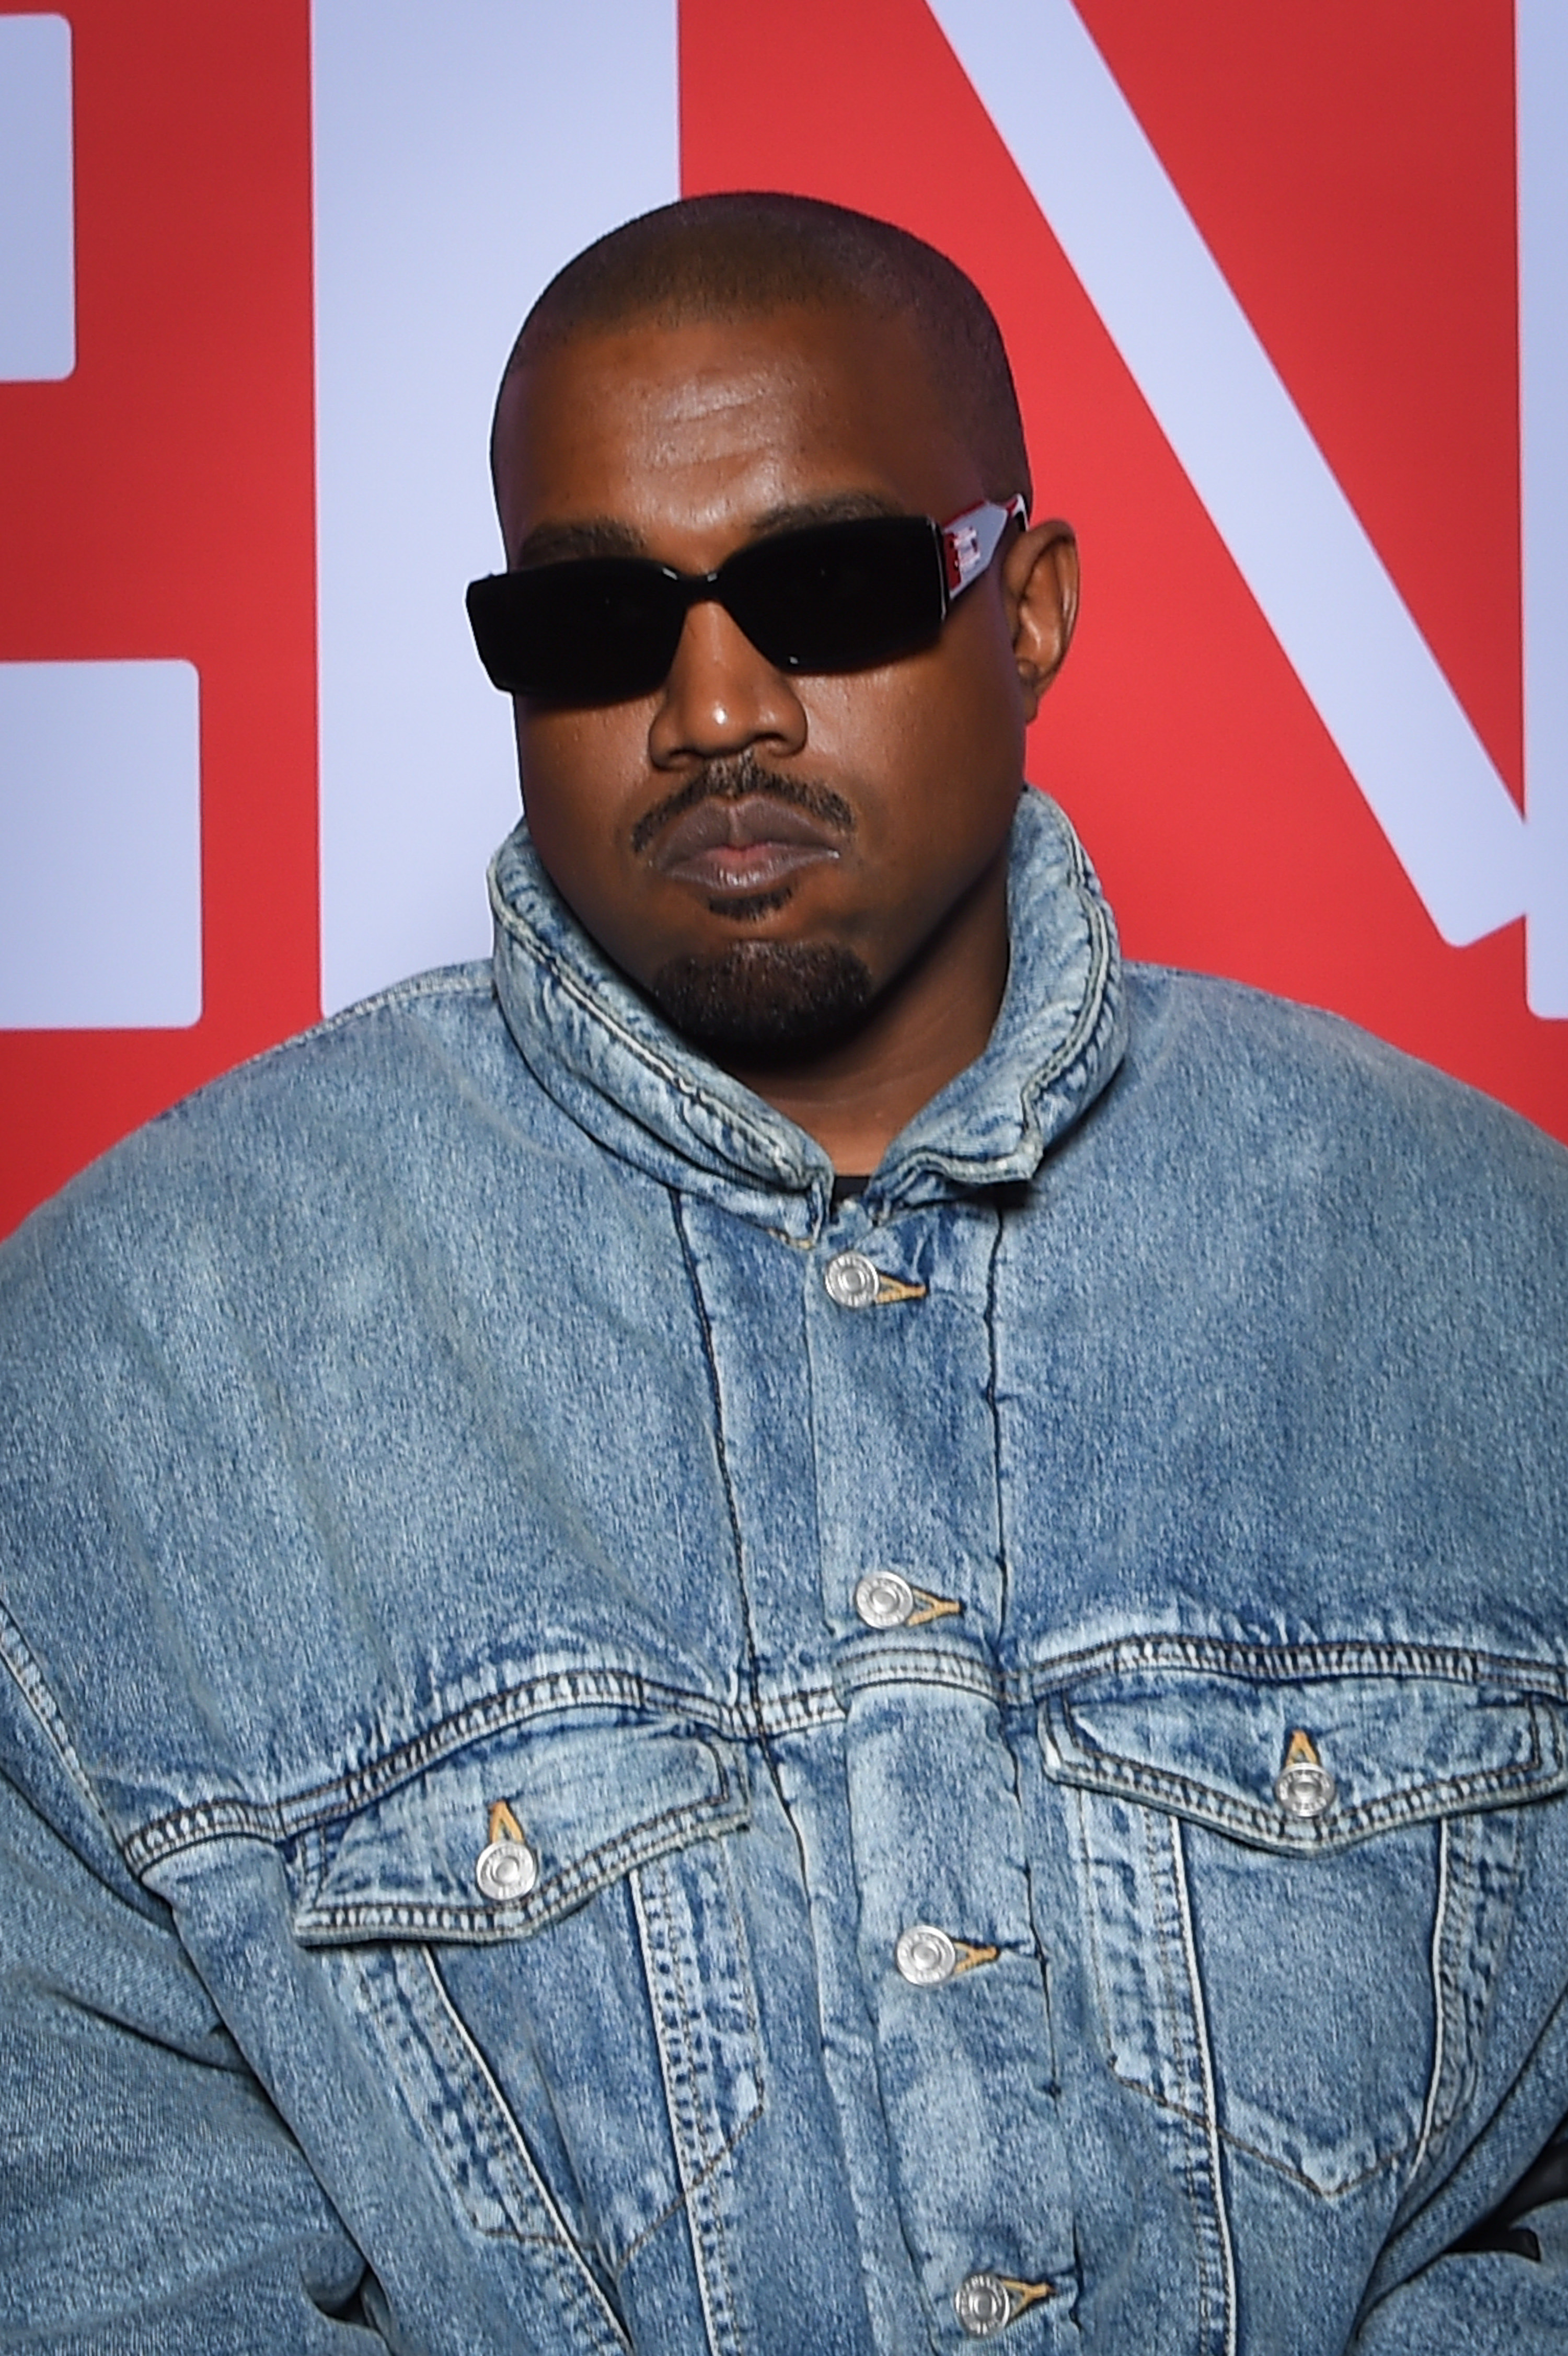 Ye in a jeans jacket and wearing sunglasses